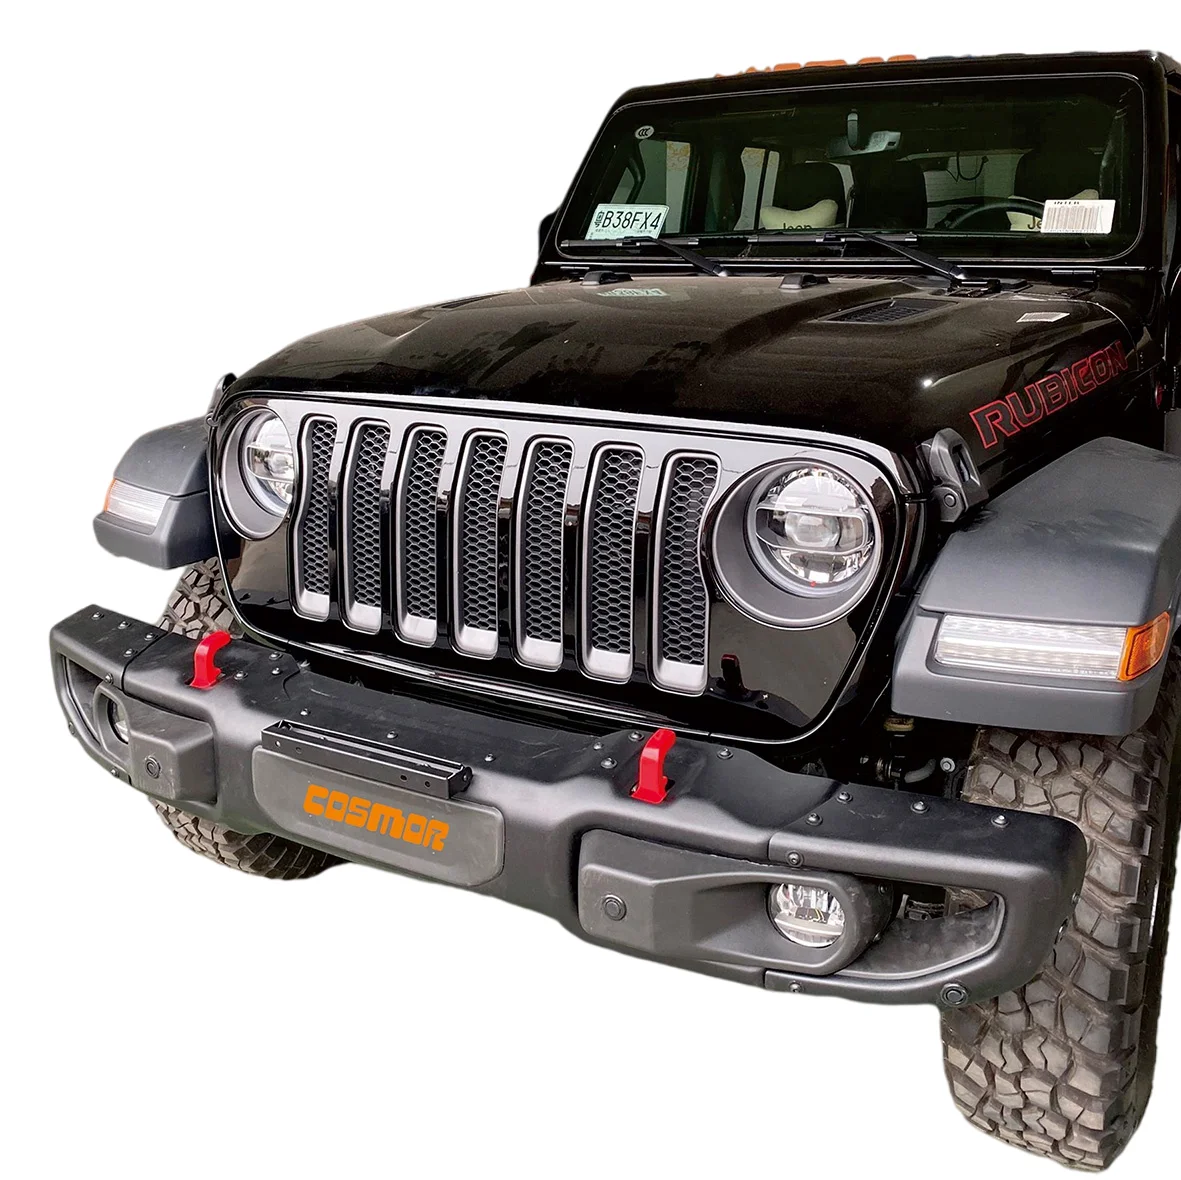 Aluminum 10th Anniversary Front Bumper For Jeep Rubicon Jl 2018 & 2019  4dr,2dr And Gladiator Jt - Buy Aluminum 10th Anniversary Front Bumpe,10th  Anniversary Front Bumpe,Front Bumper Product on 